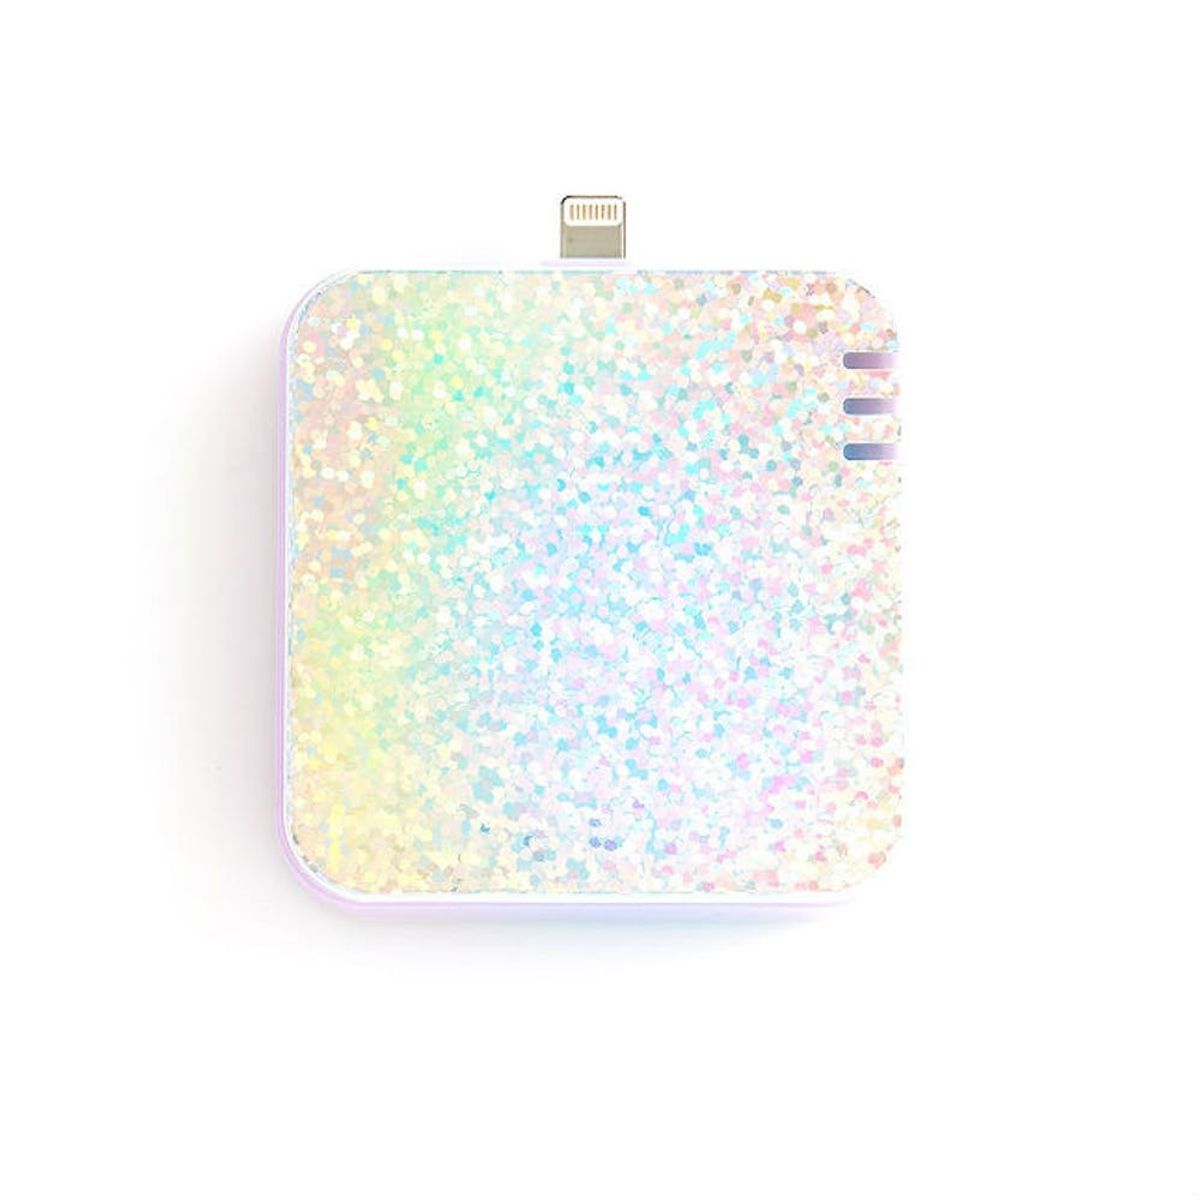 11 Insanely Cute Portable Chargers